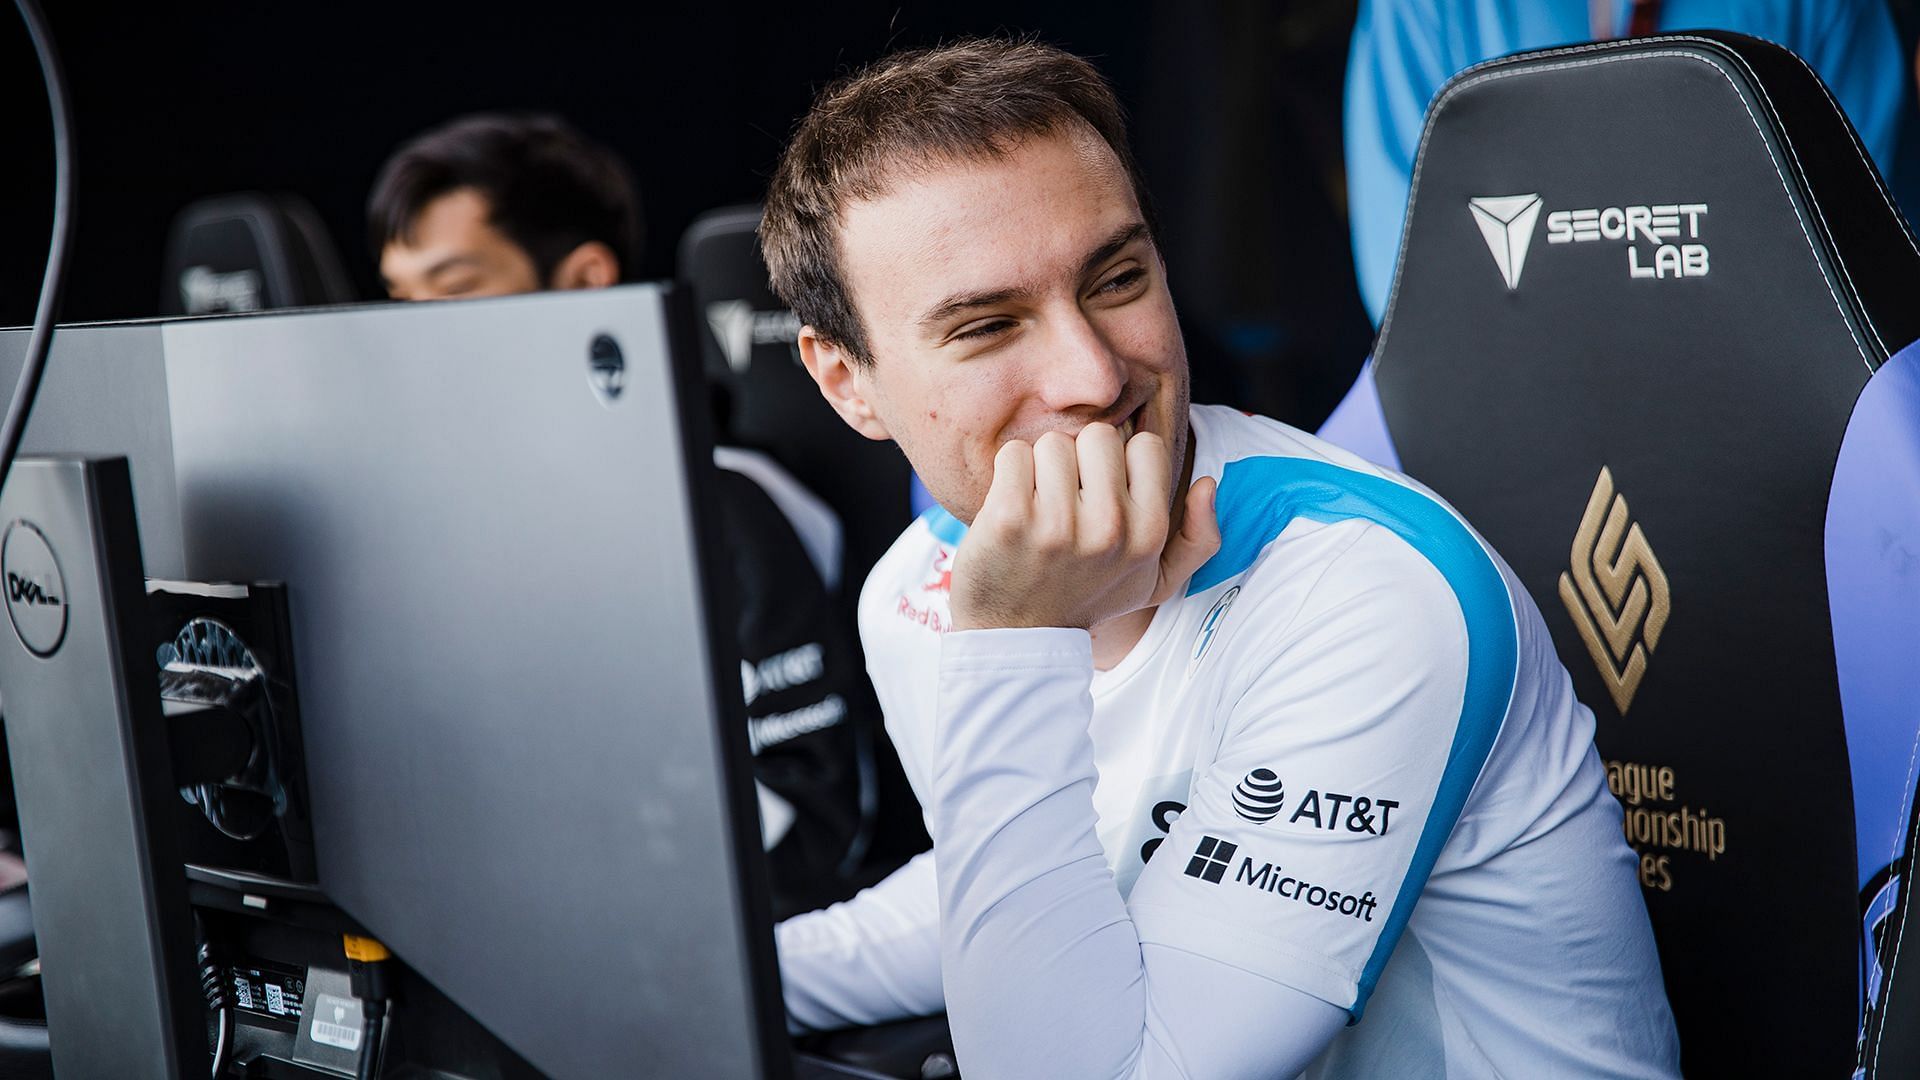 Perkz is set to be the key player in the Vitality superteam for 2022 season (Image via League of Legends)